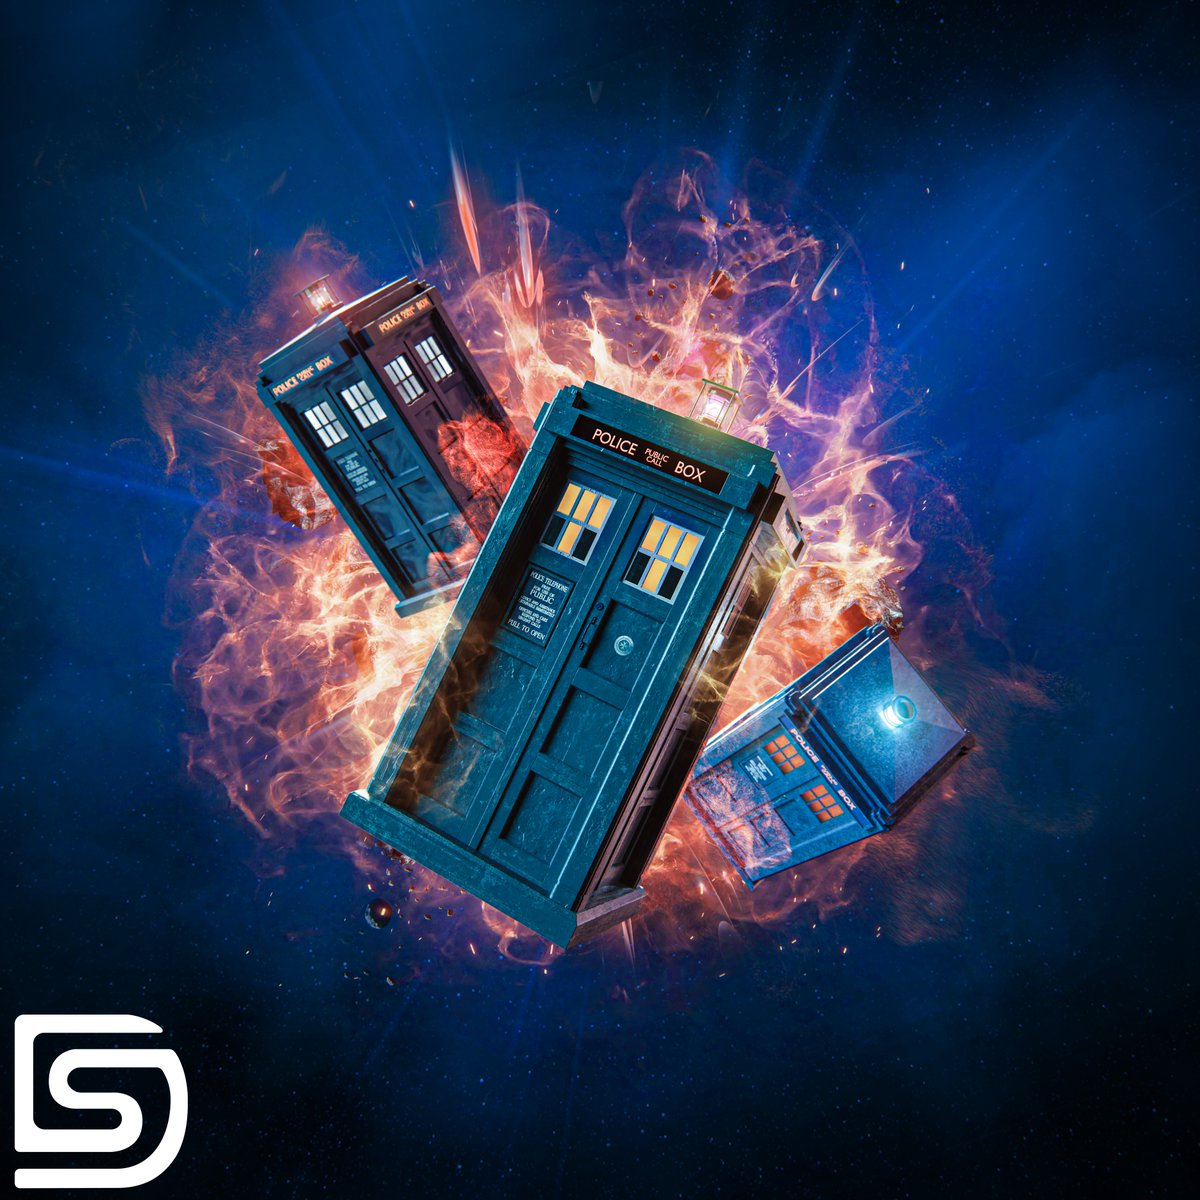 Here is a quick render of the most recent boxes I have made :) McGann, TYJ and my custom.

Didn't want to do a boring studio so here they are in an explosion!

#doctorwho #doctorwho60thanniversary #tardis #vortex #paulmcgann #5thdoctor #6thdoctor #7thdoctor #explosion #blender